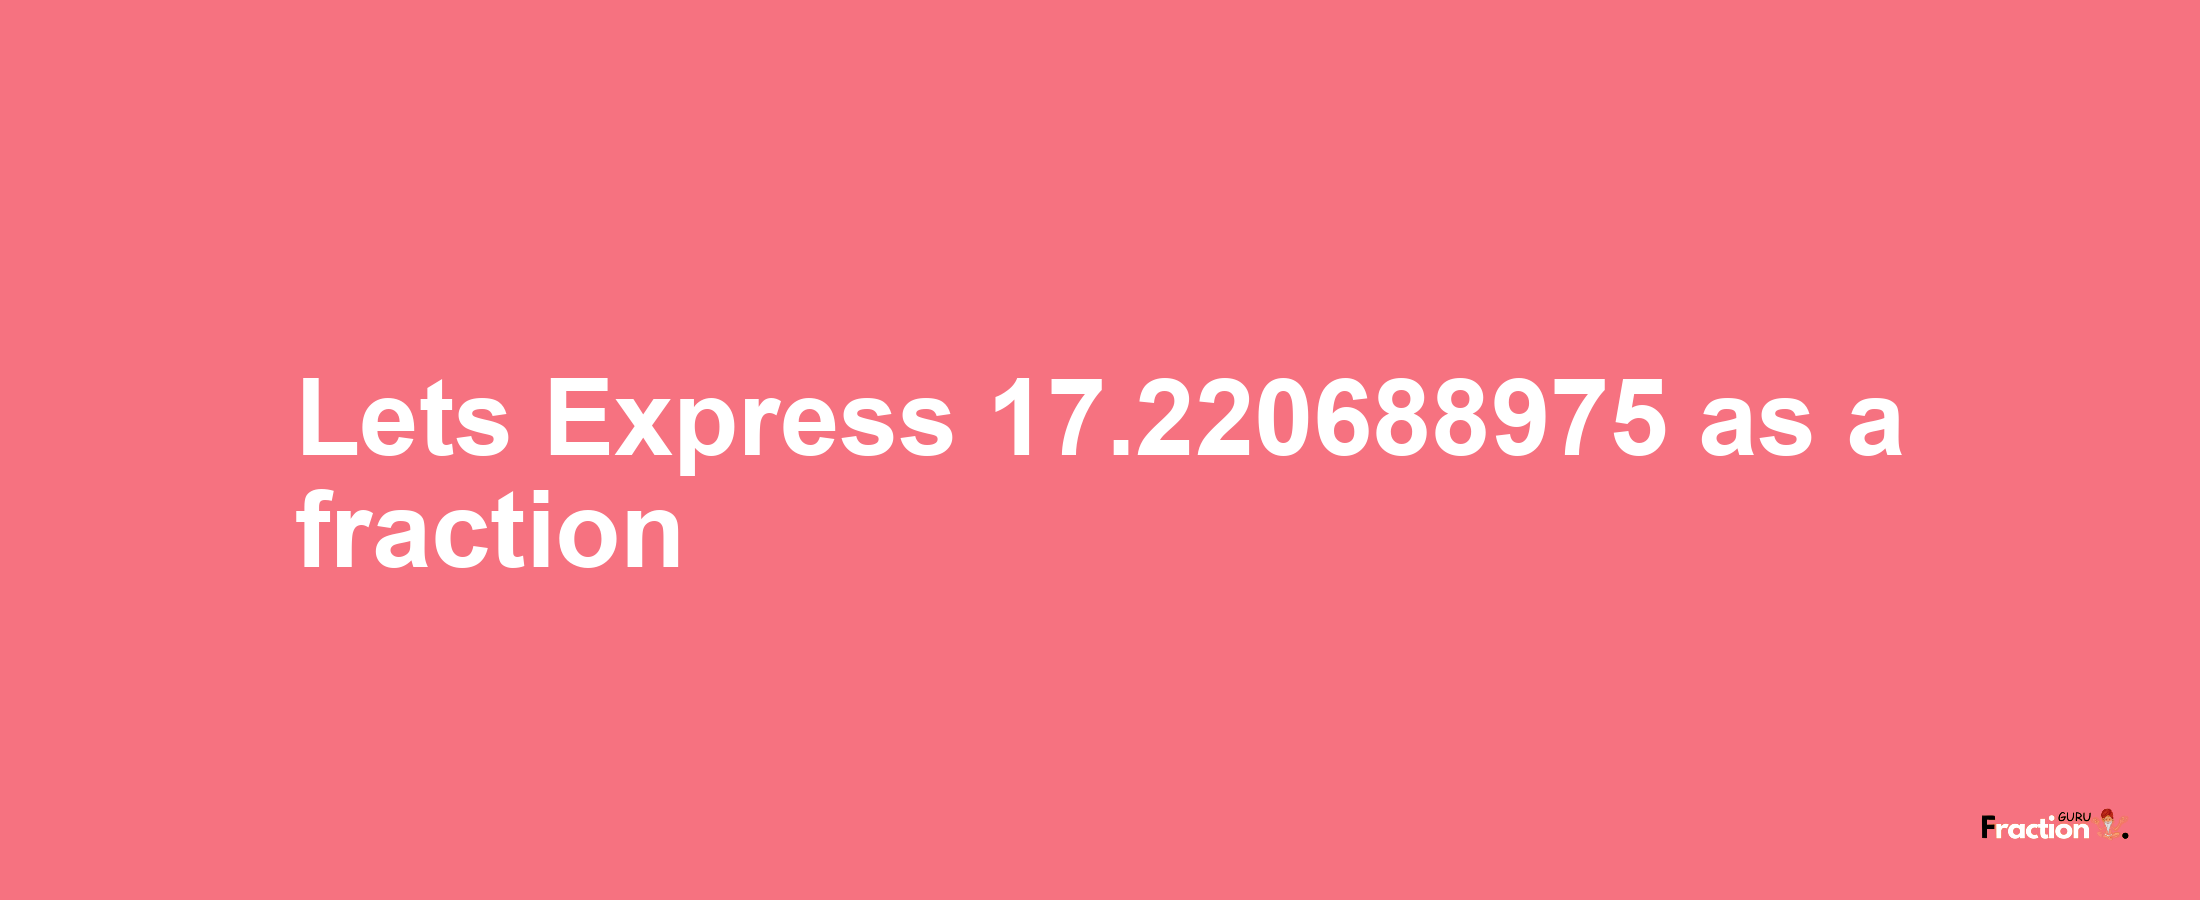 Lets Express 17.220688975 as afraction